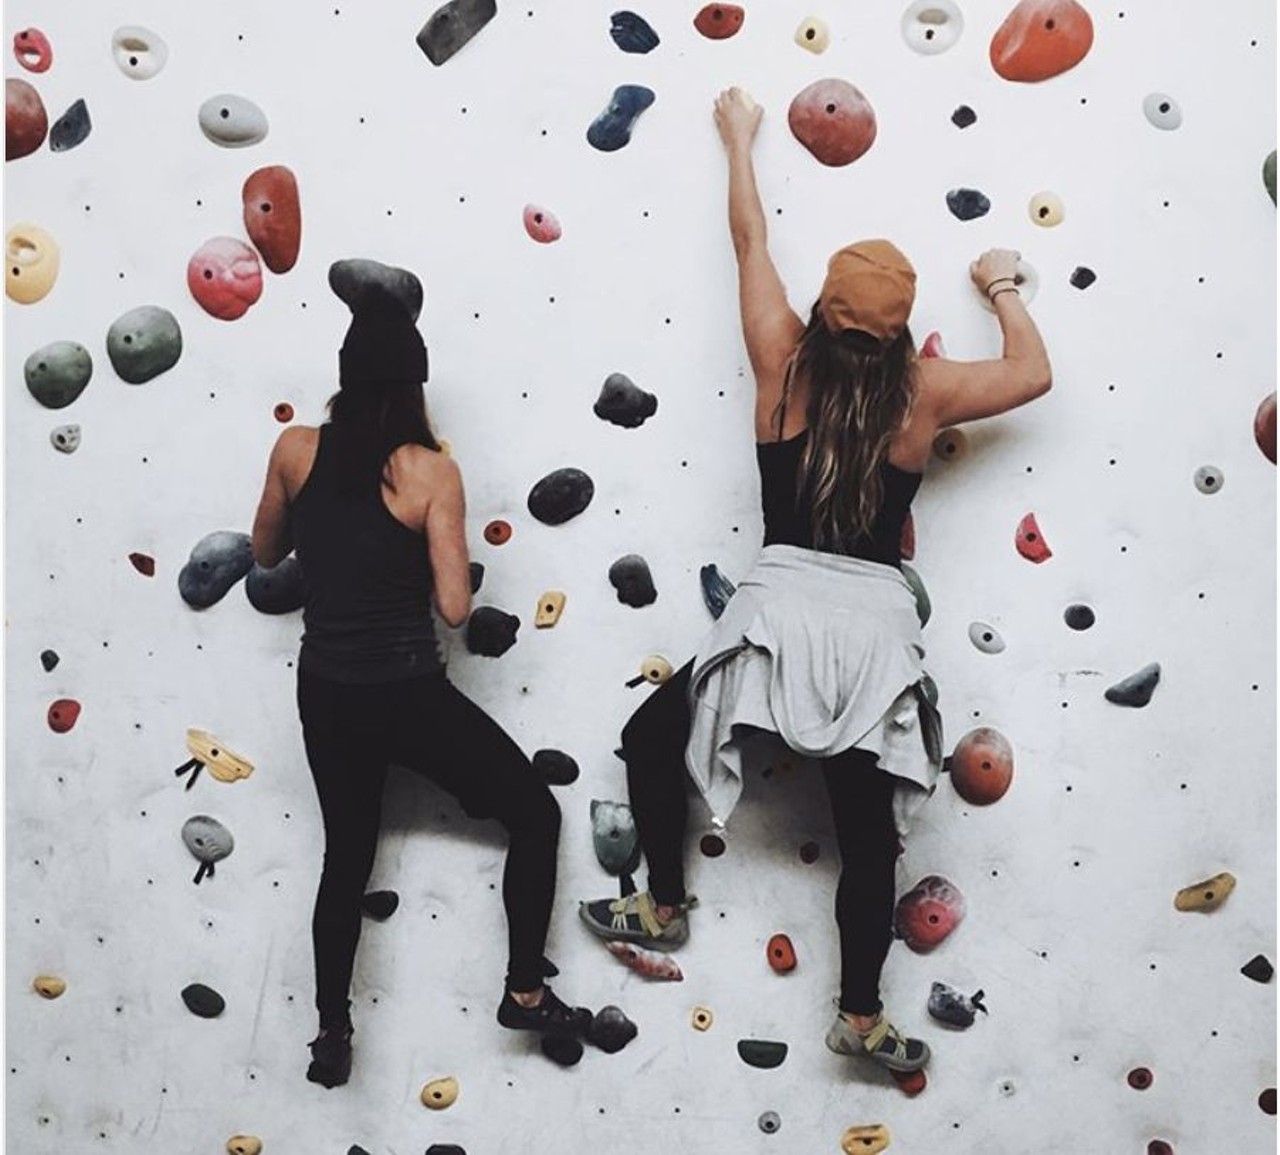  Climb Cleveland
2190 Professor Ave., 216-906-4186 
Designed for both experienced climbers and beginners alike, the rock wall at Climb Cleveland will give you that rush of adrenaline you need to help celebrate yet another year on this planet.
Photo via  juliavivolo/Instagram